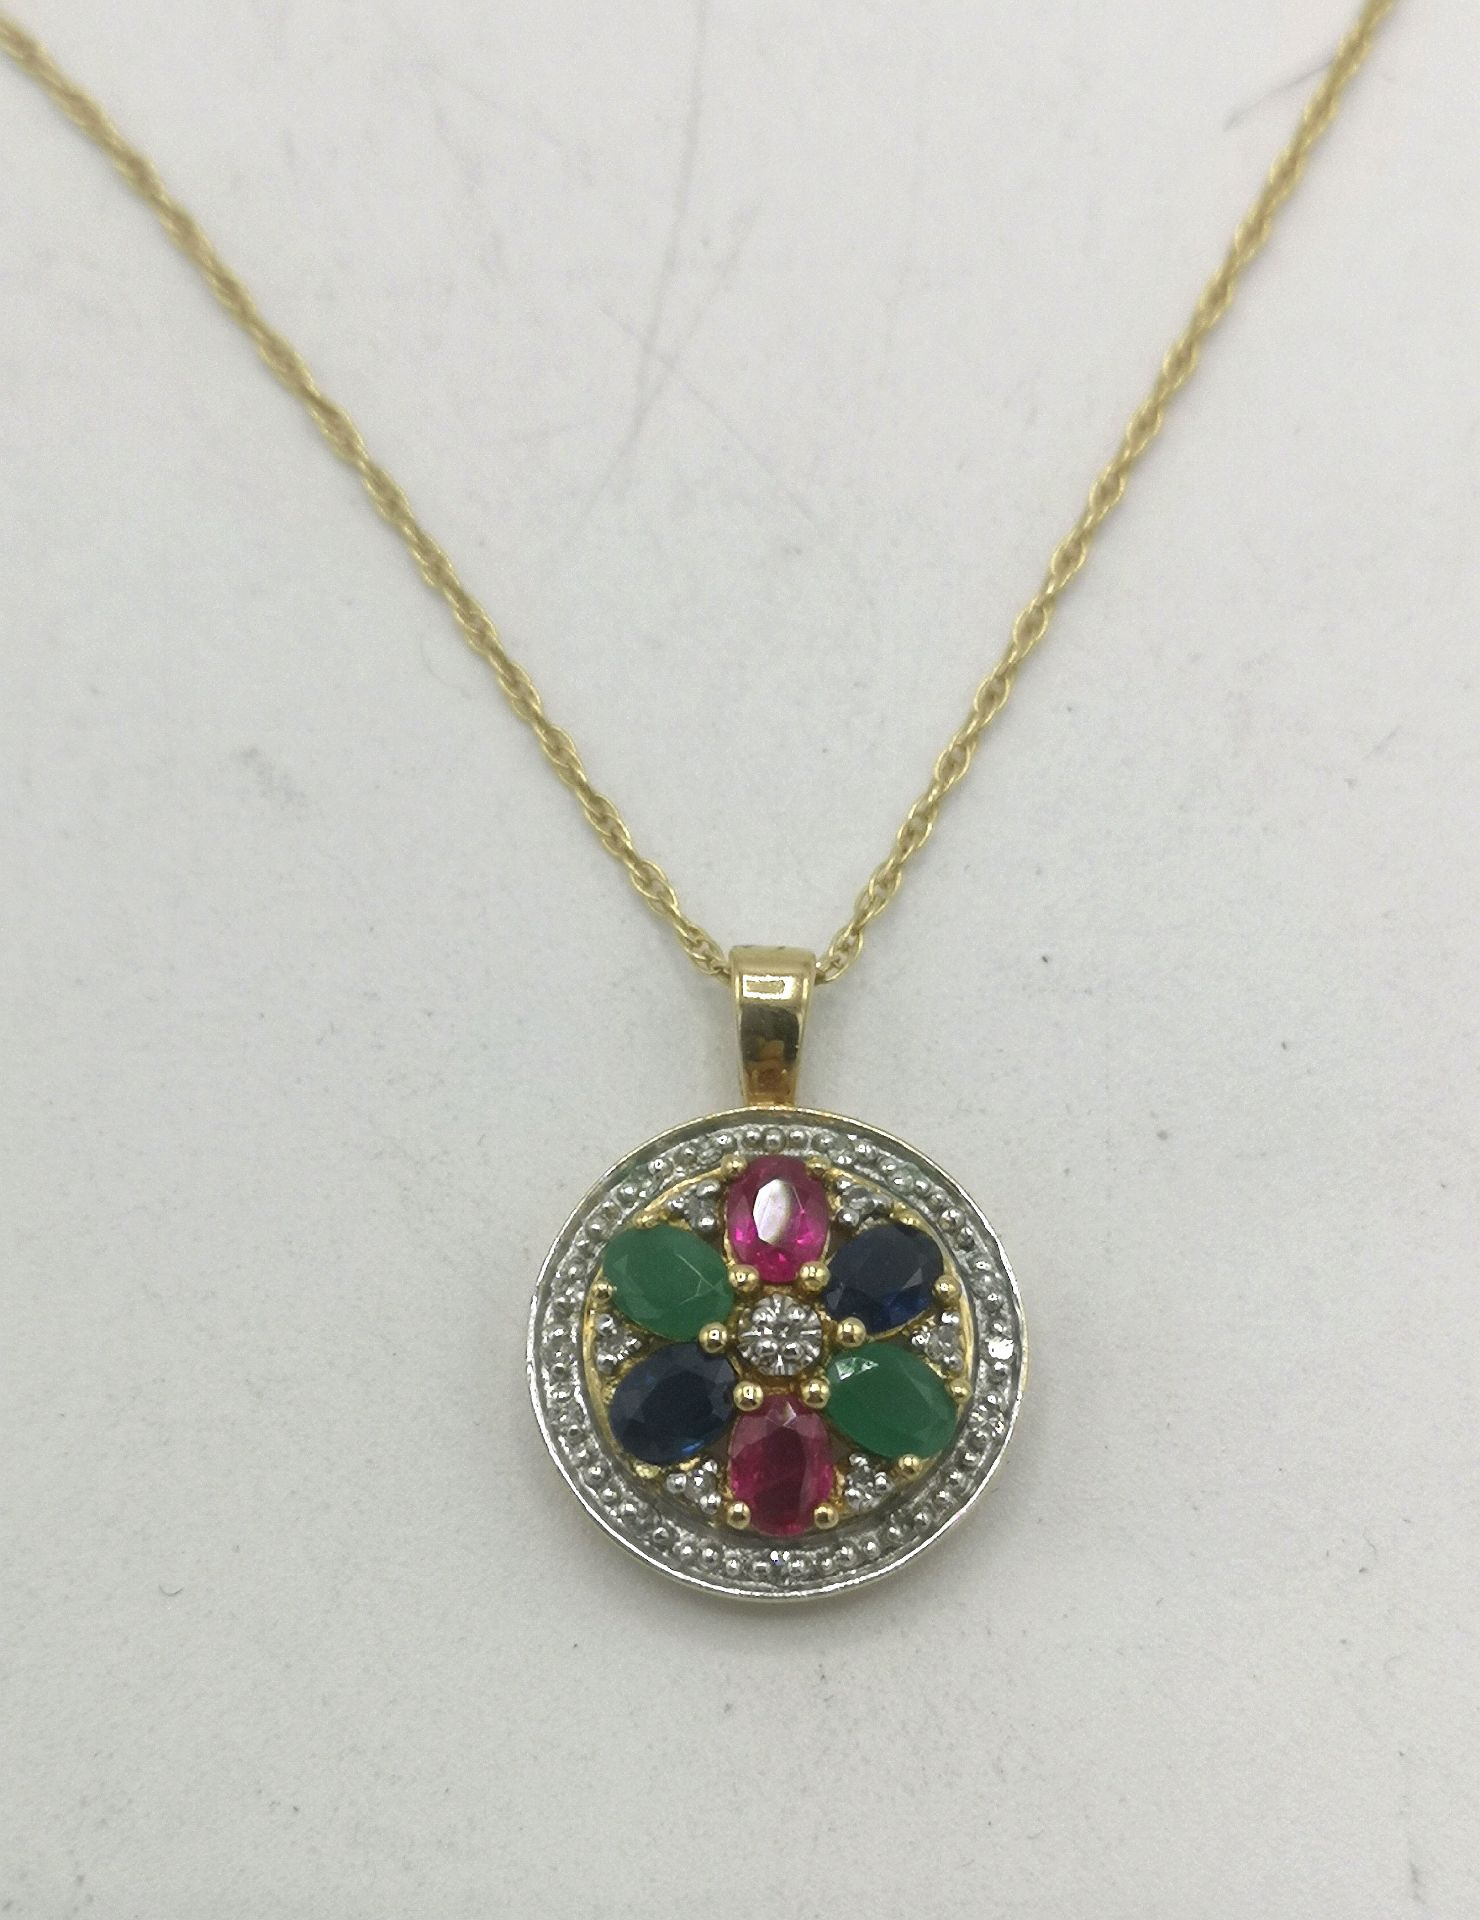 9ct gold pendant set with rubies, emeralds and sapphires - Image 5 of 8